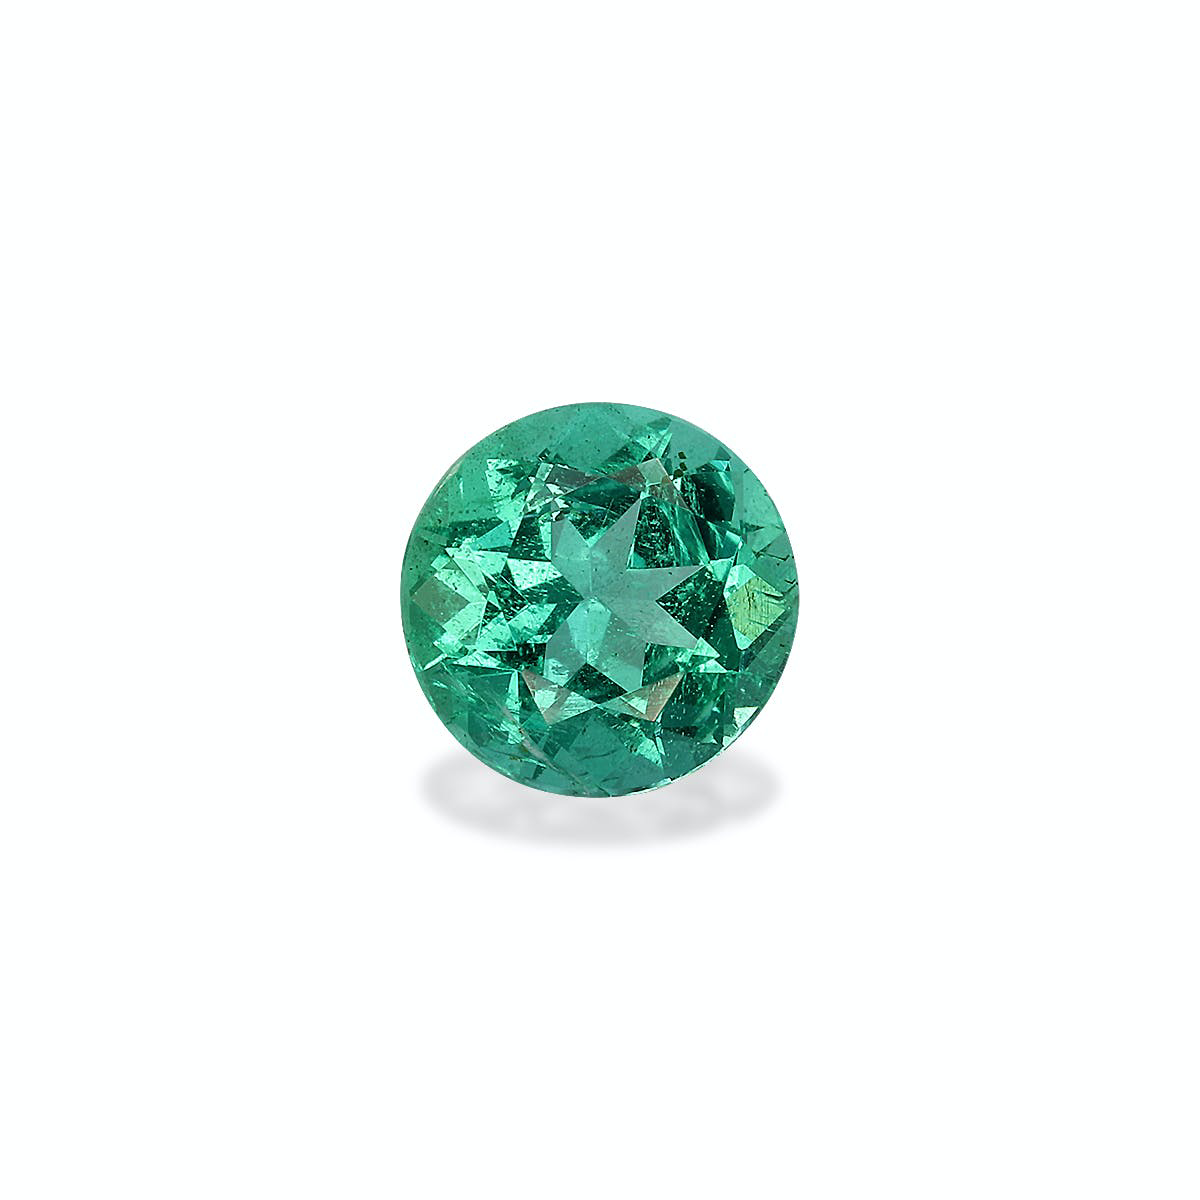 Picture of Green Zambian Emerald 0.74ct - 6mm (PG0317)